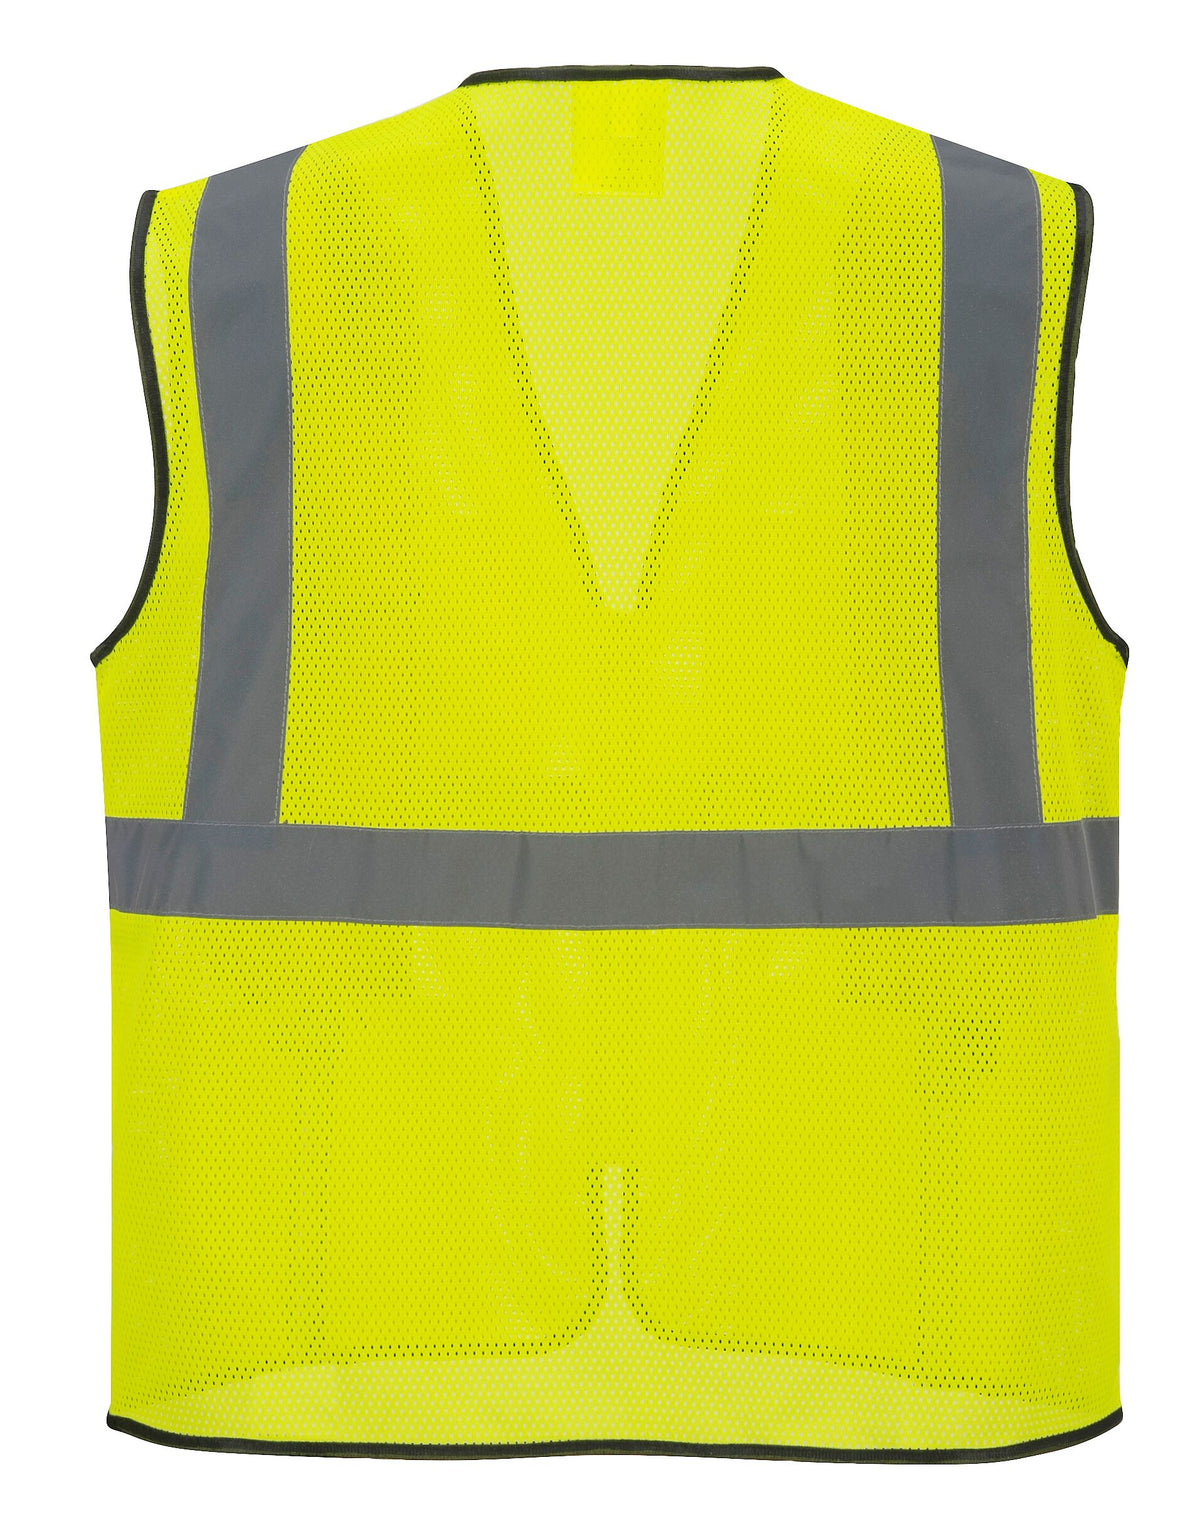 Tampa Mesh Vest - Safety Ansi Class 2 - High Visibility